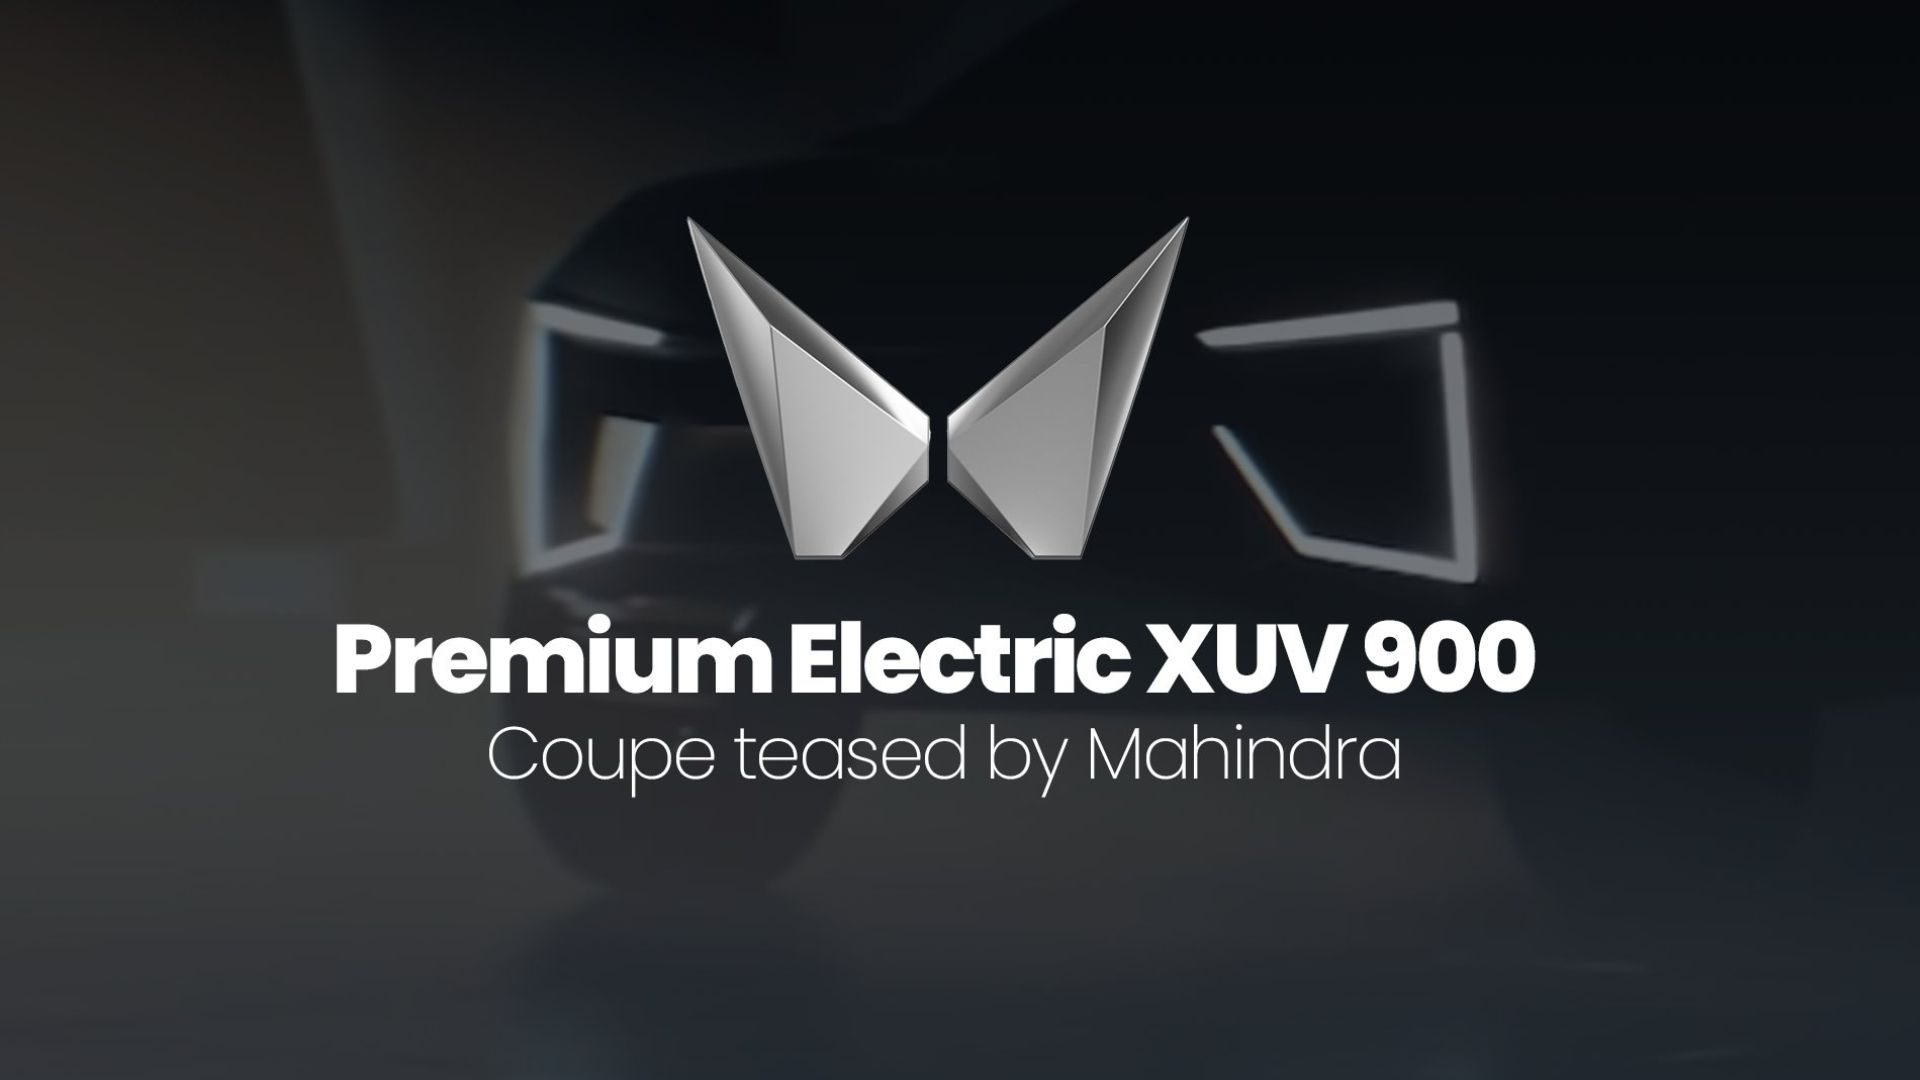 https://e-vehicleinfo.com/mahindra-xuv-900-ev-price-in-india-and-features/